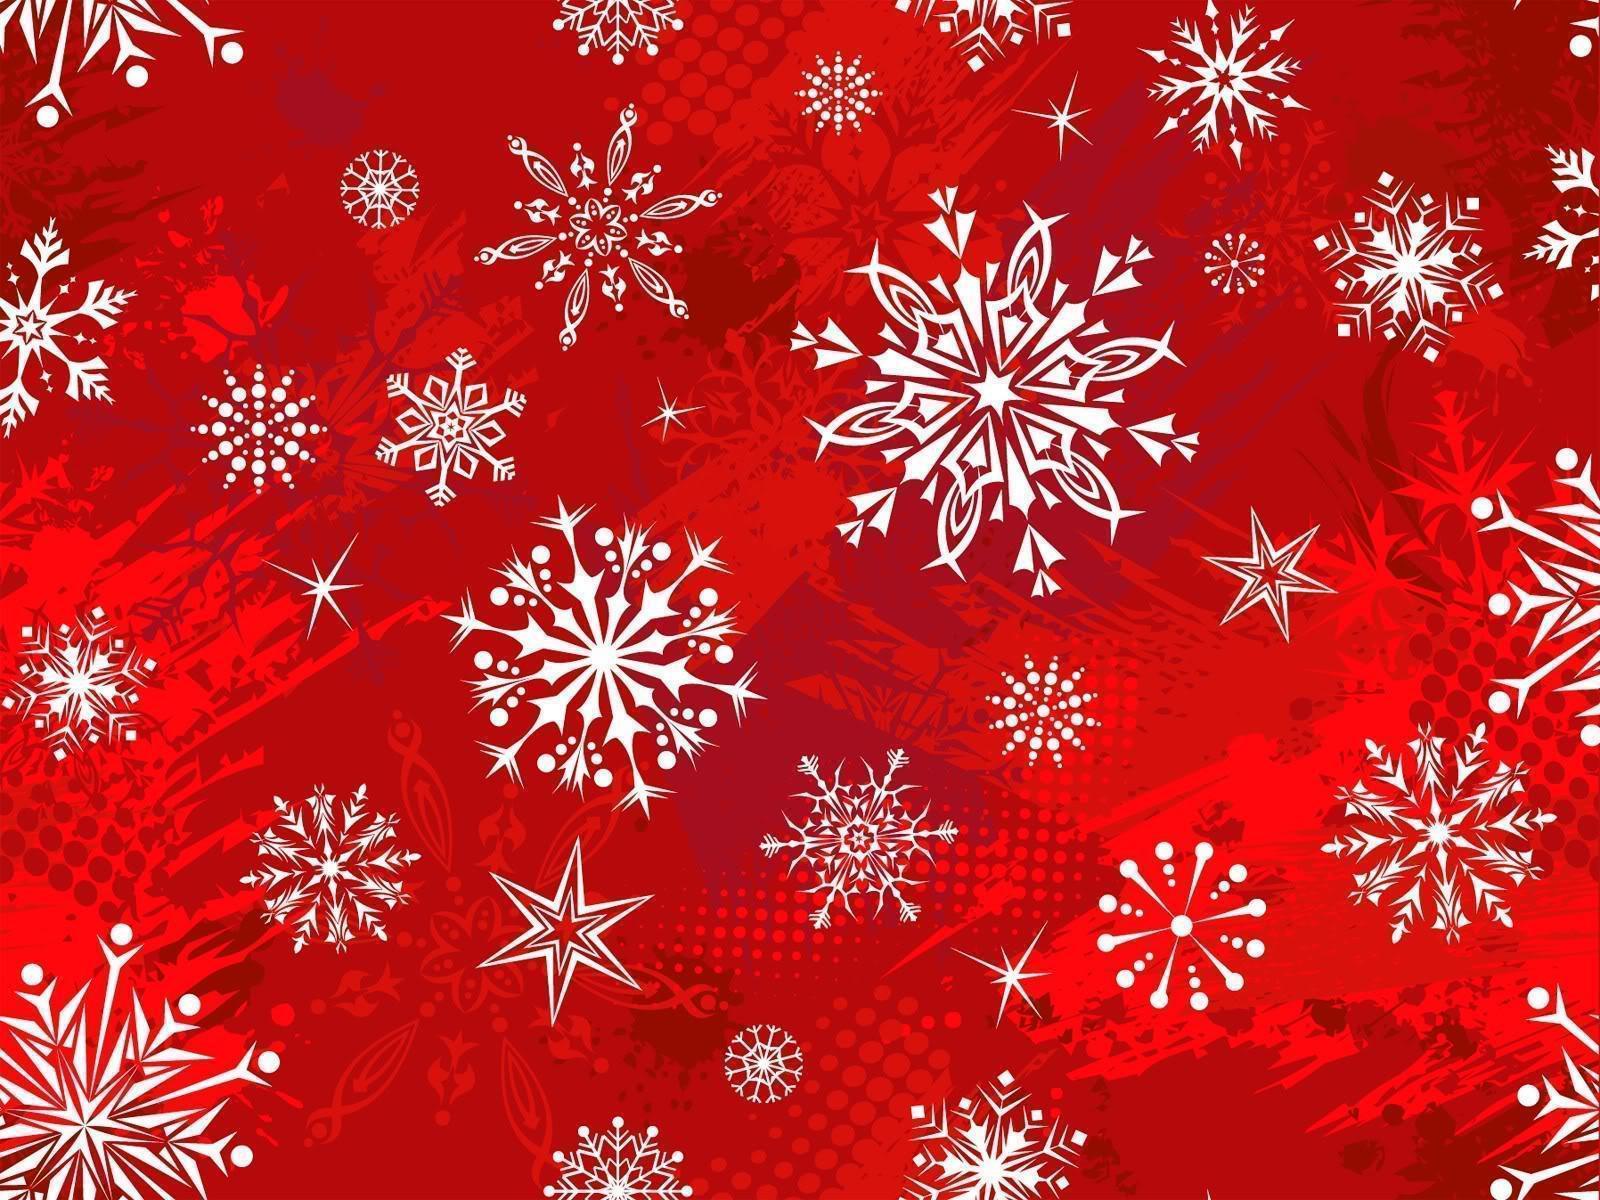 Free Christmas Wallpaper Backgrounds Wallpaper Cave